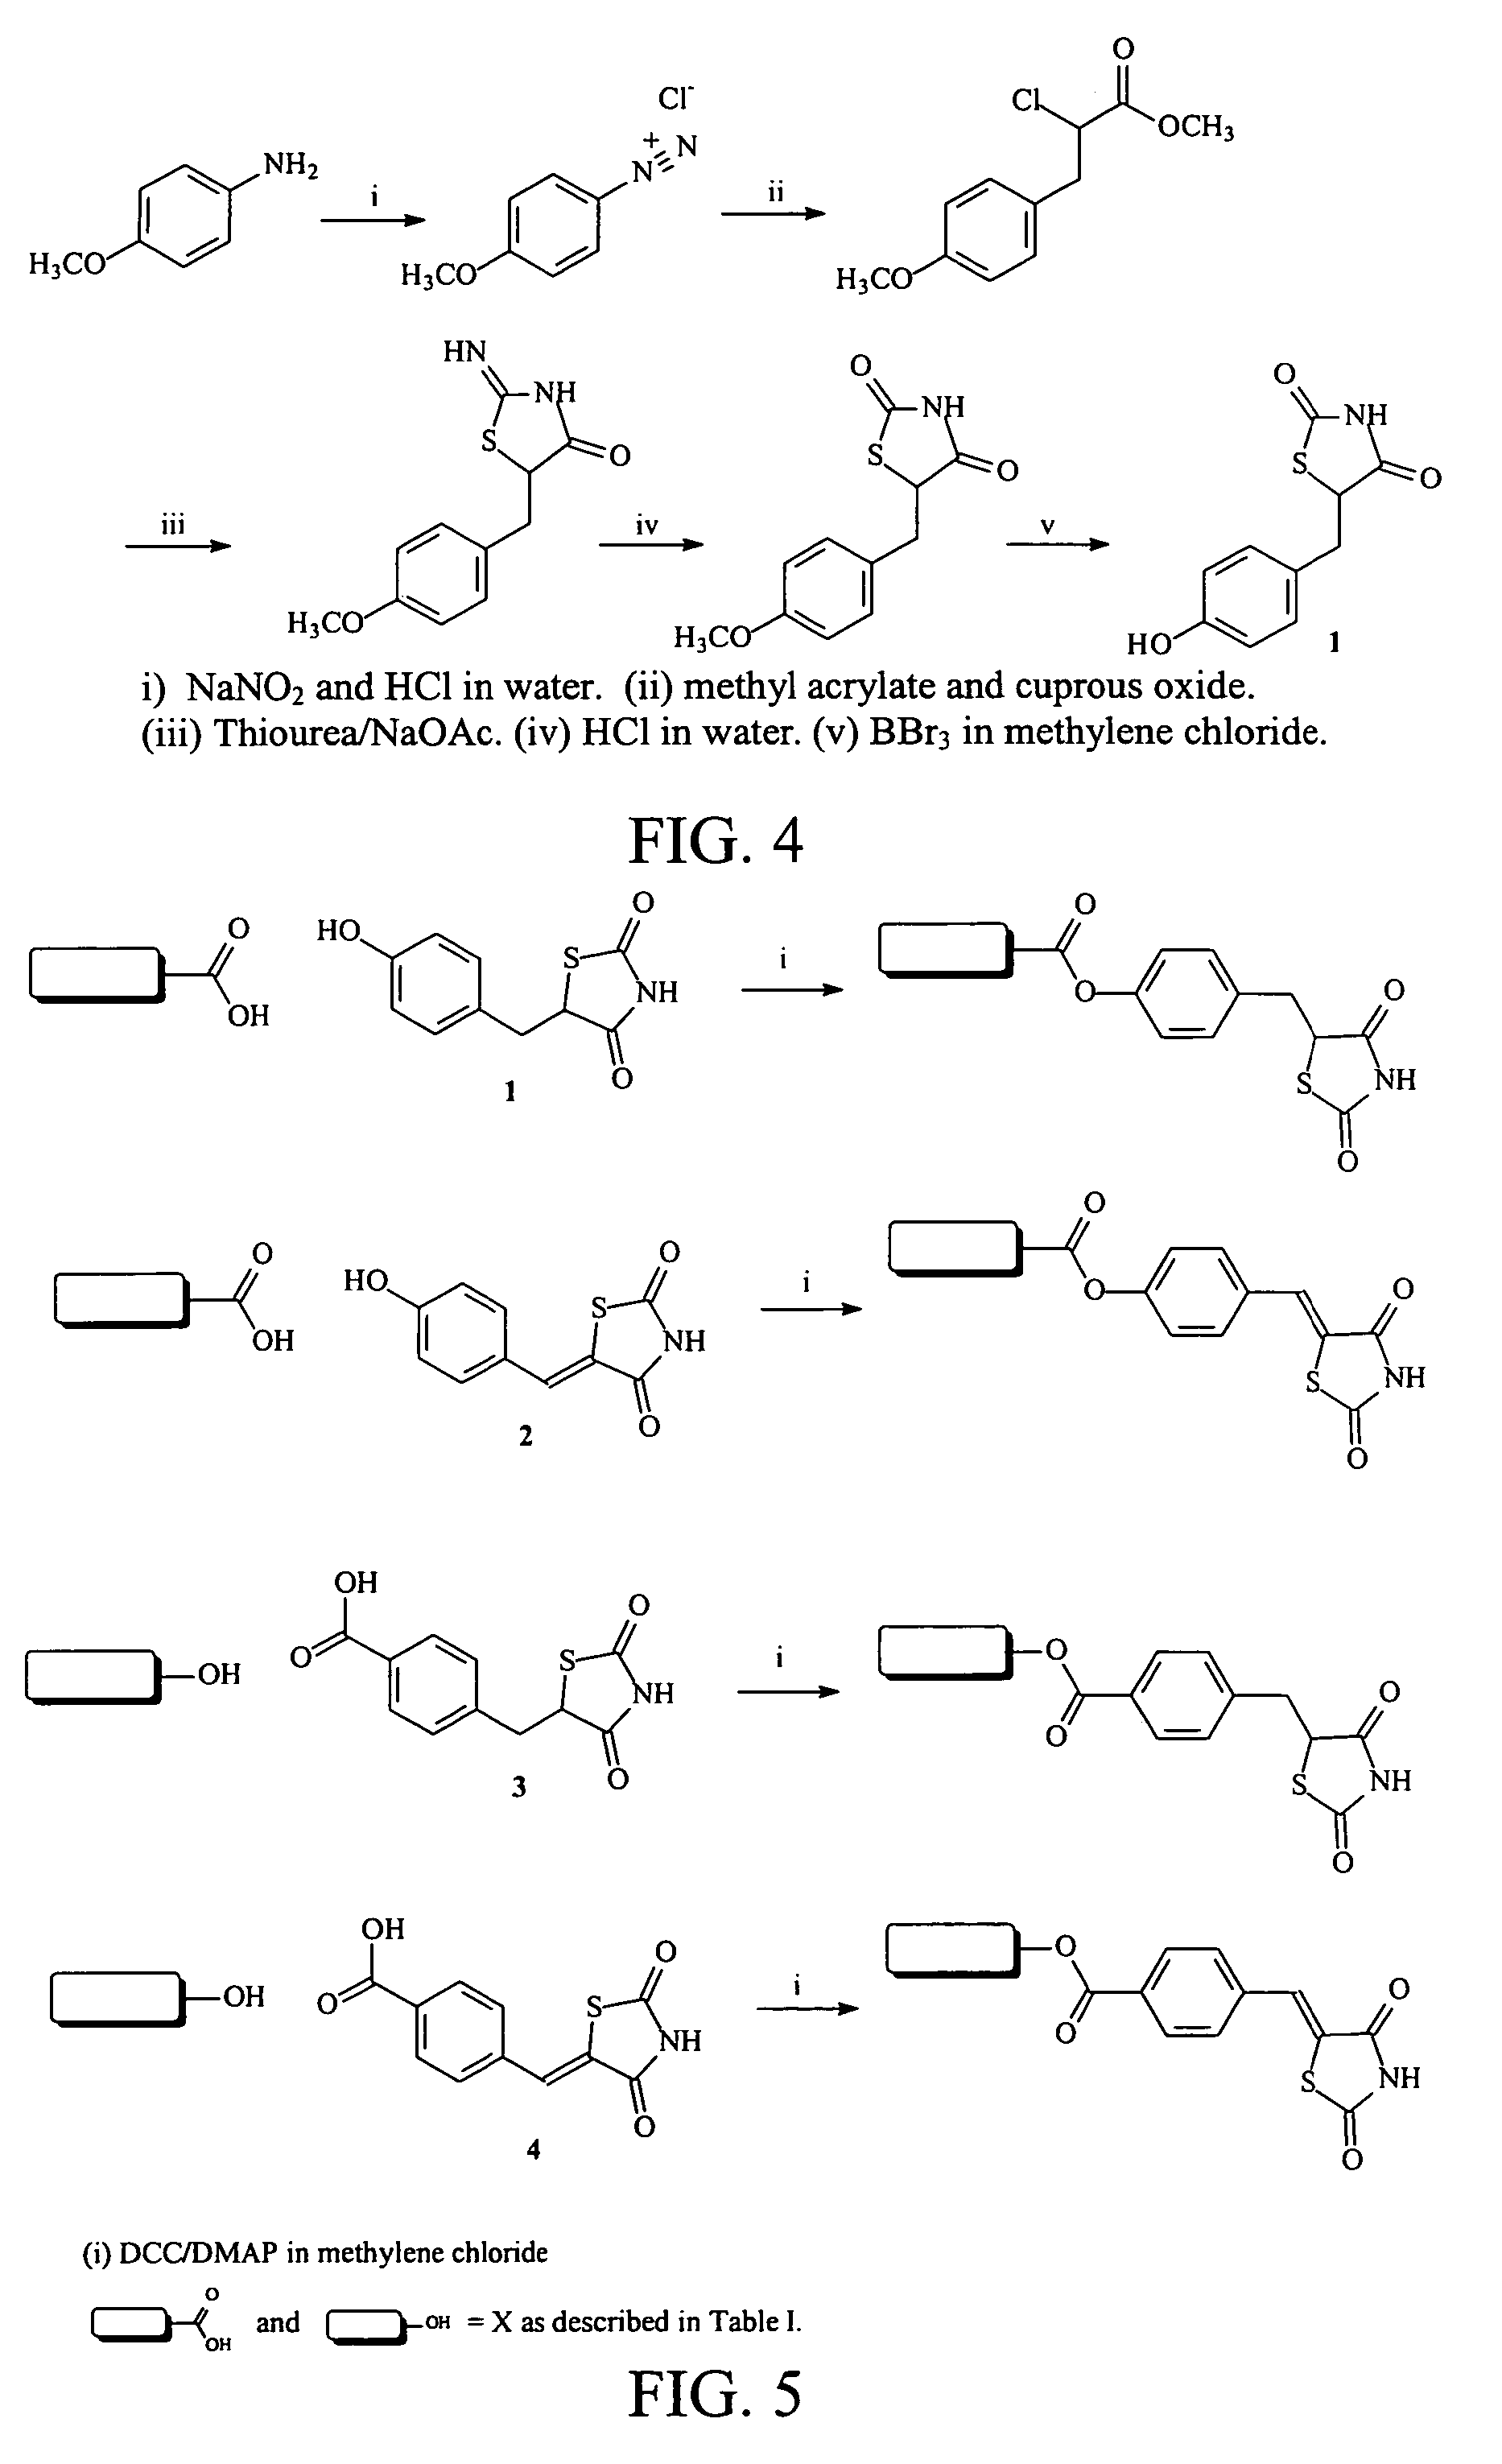 Materials and methods for the treatment of diabetes, hyperlipidemia, hypercholesterolemia, and atherosclerosis